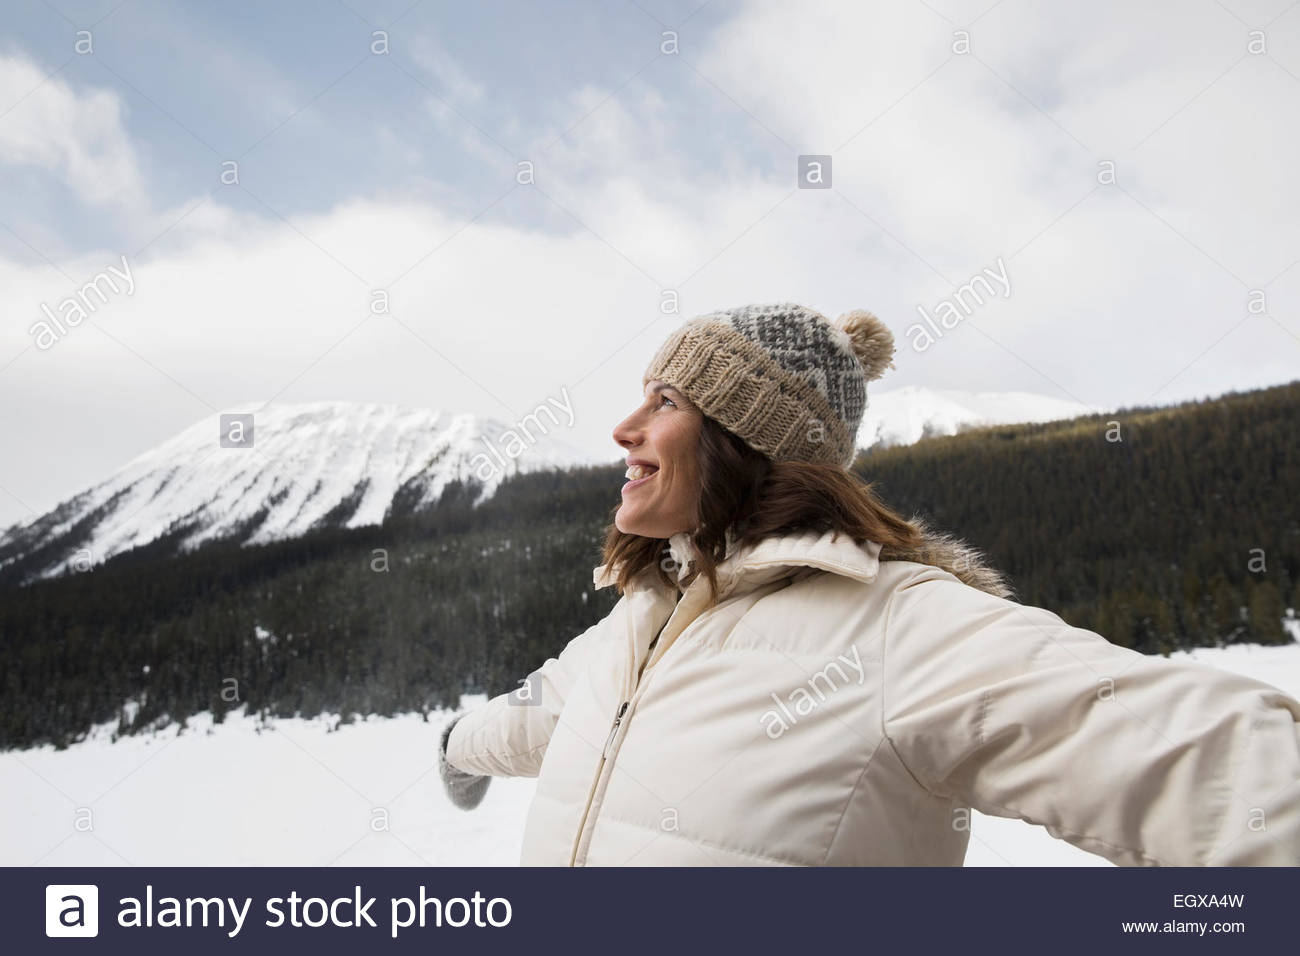 Smiling woman with arms outstretched in snowy field Banque D'Images